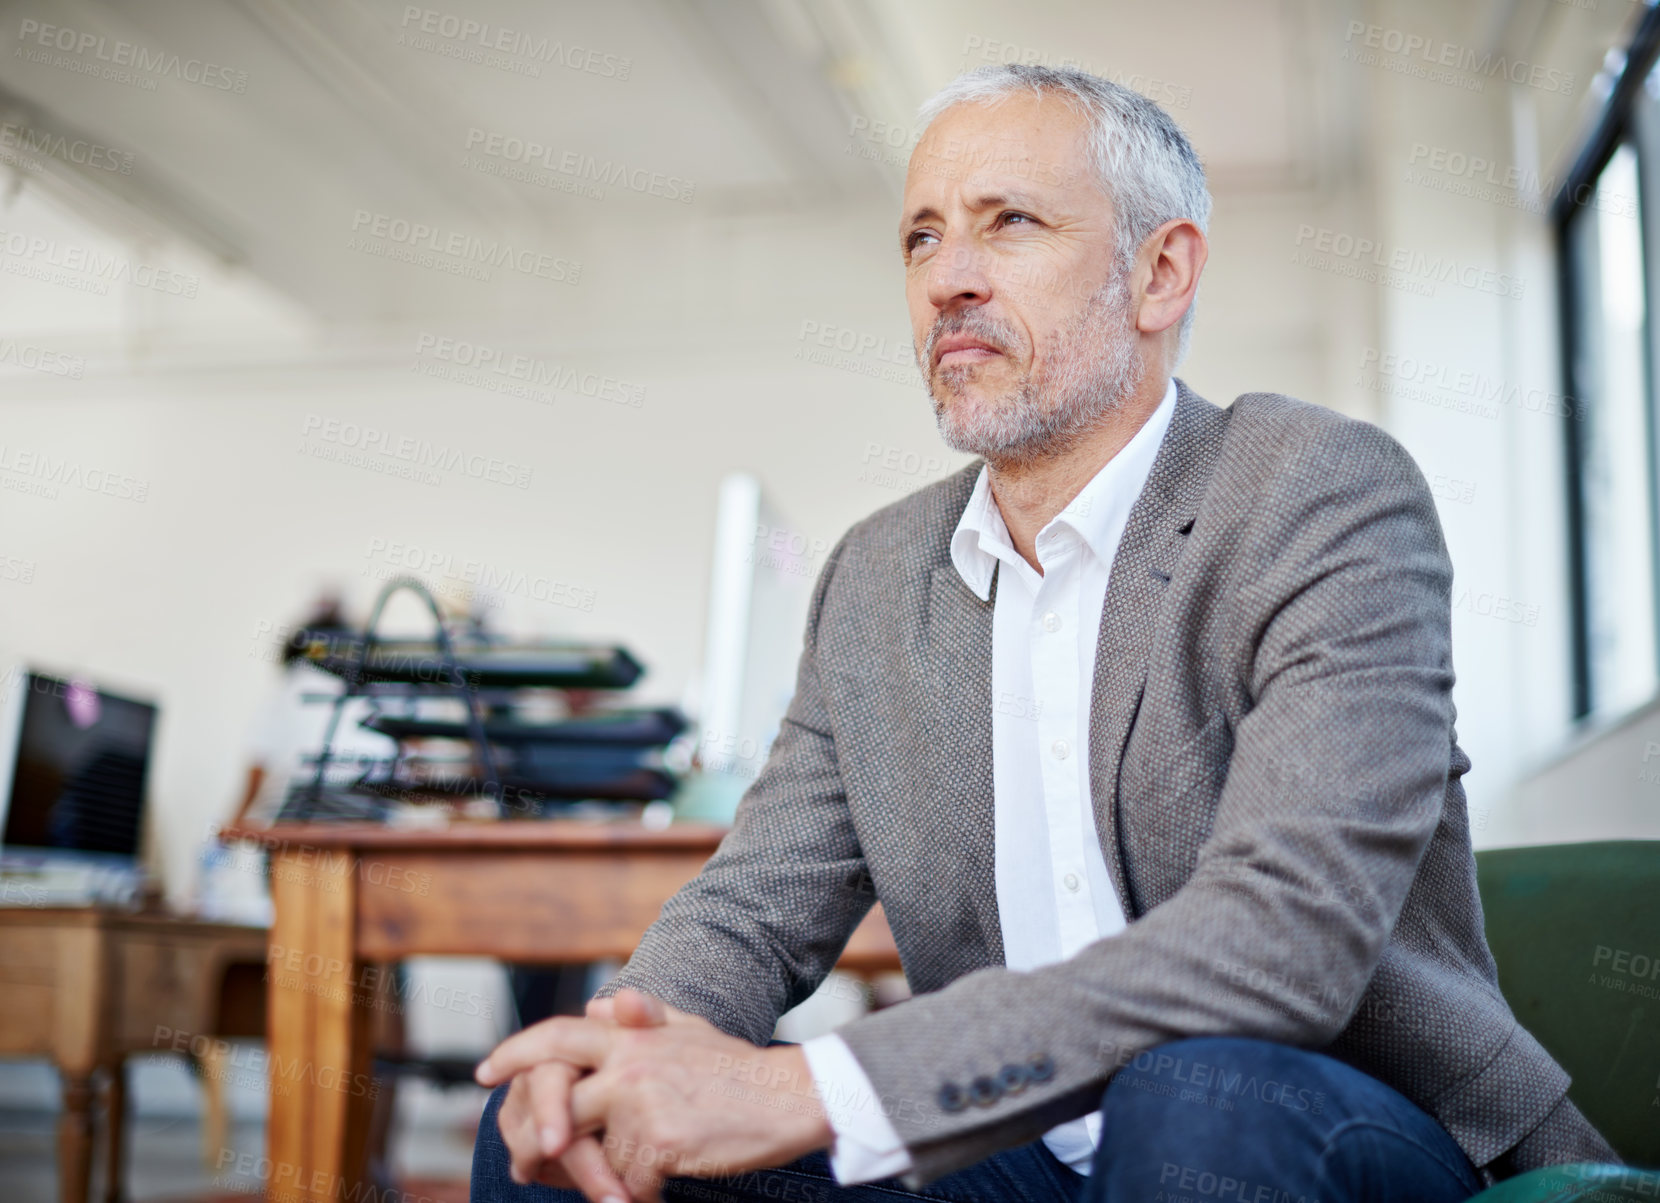 Buy stock photo Shot of a mature businessman sitting in an office